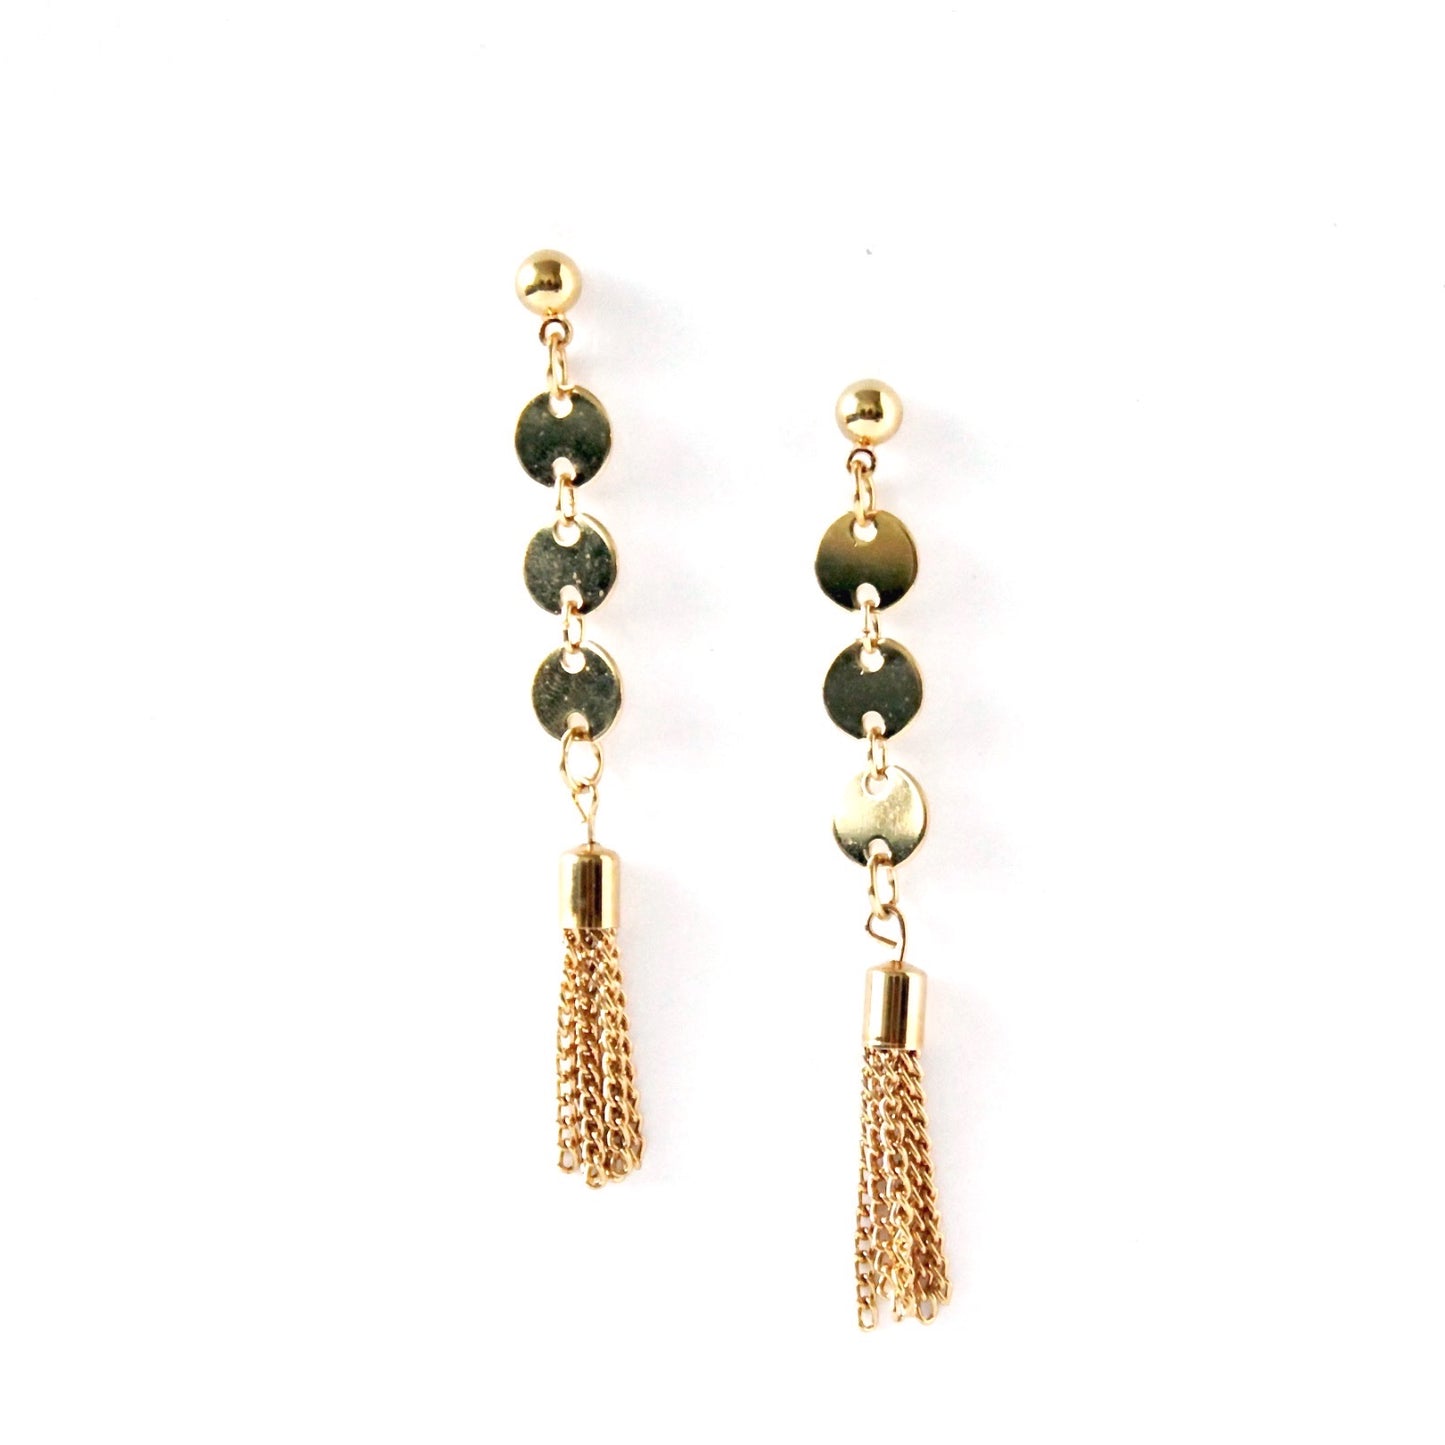 The Affluent Coin Earrings